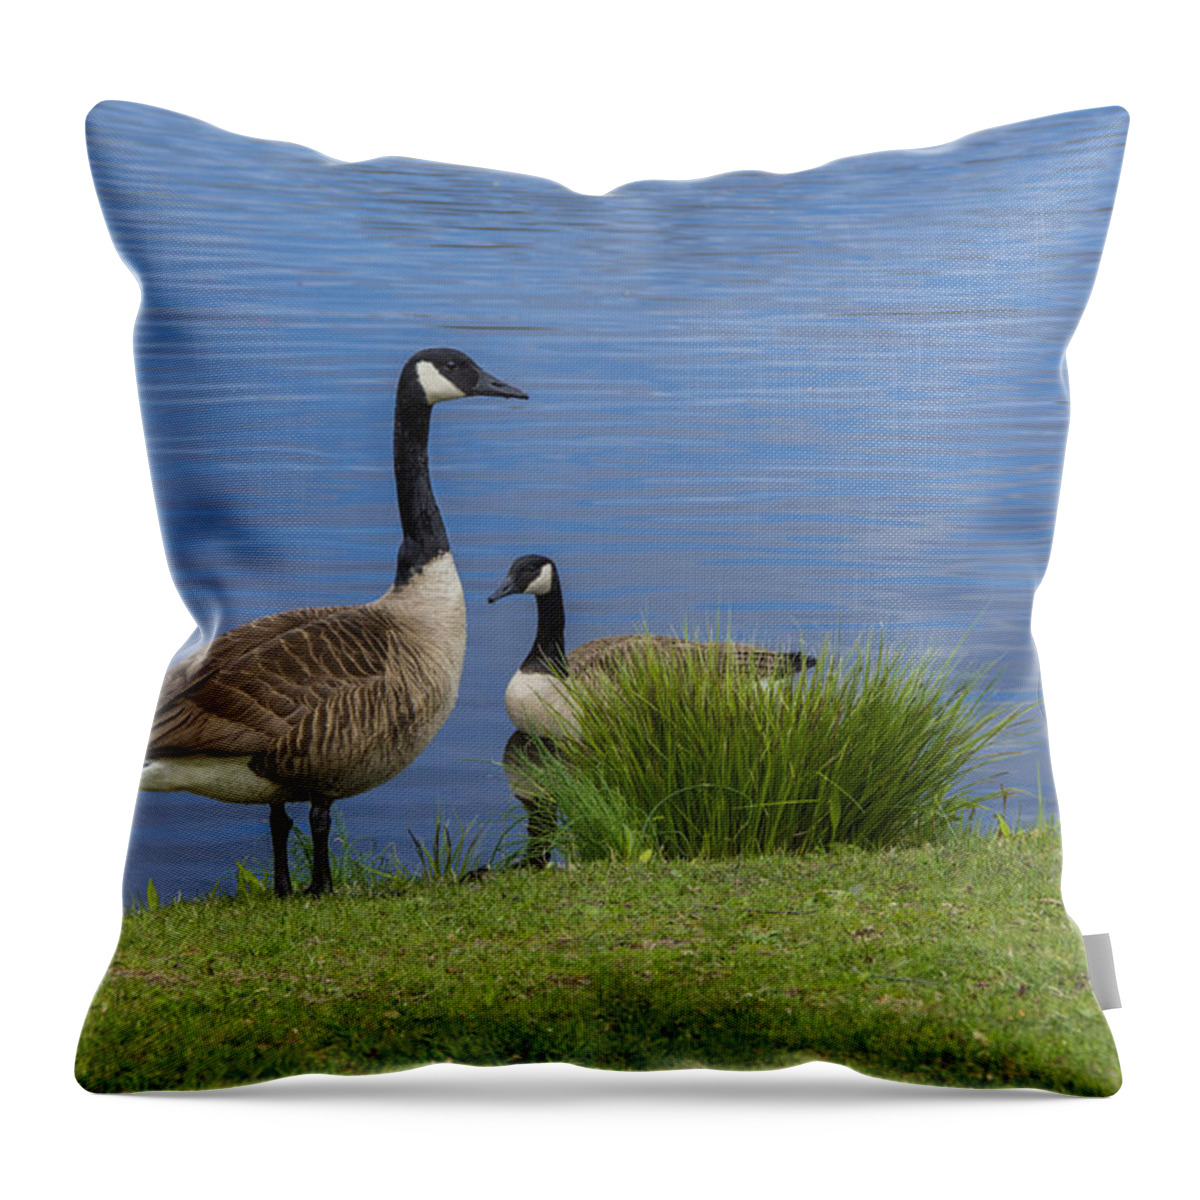 Geese Throw Pillow featuring the photograph The Canadians by Cathy Kovarik